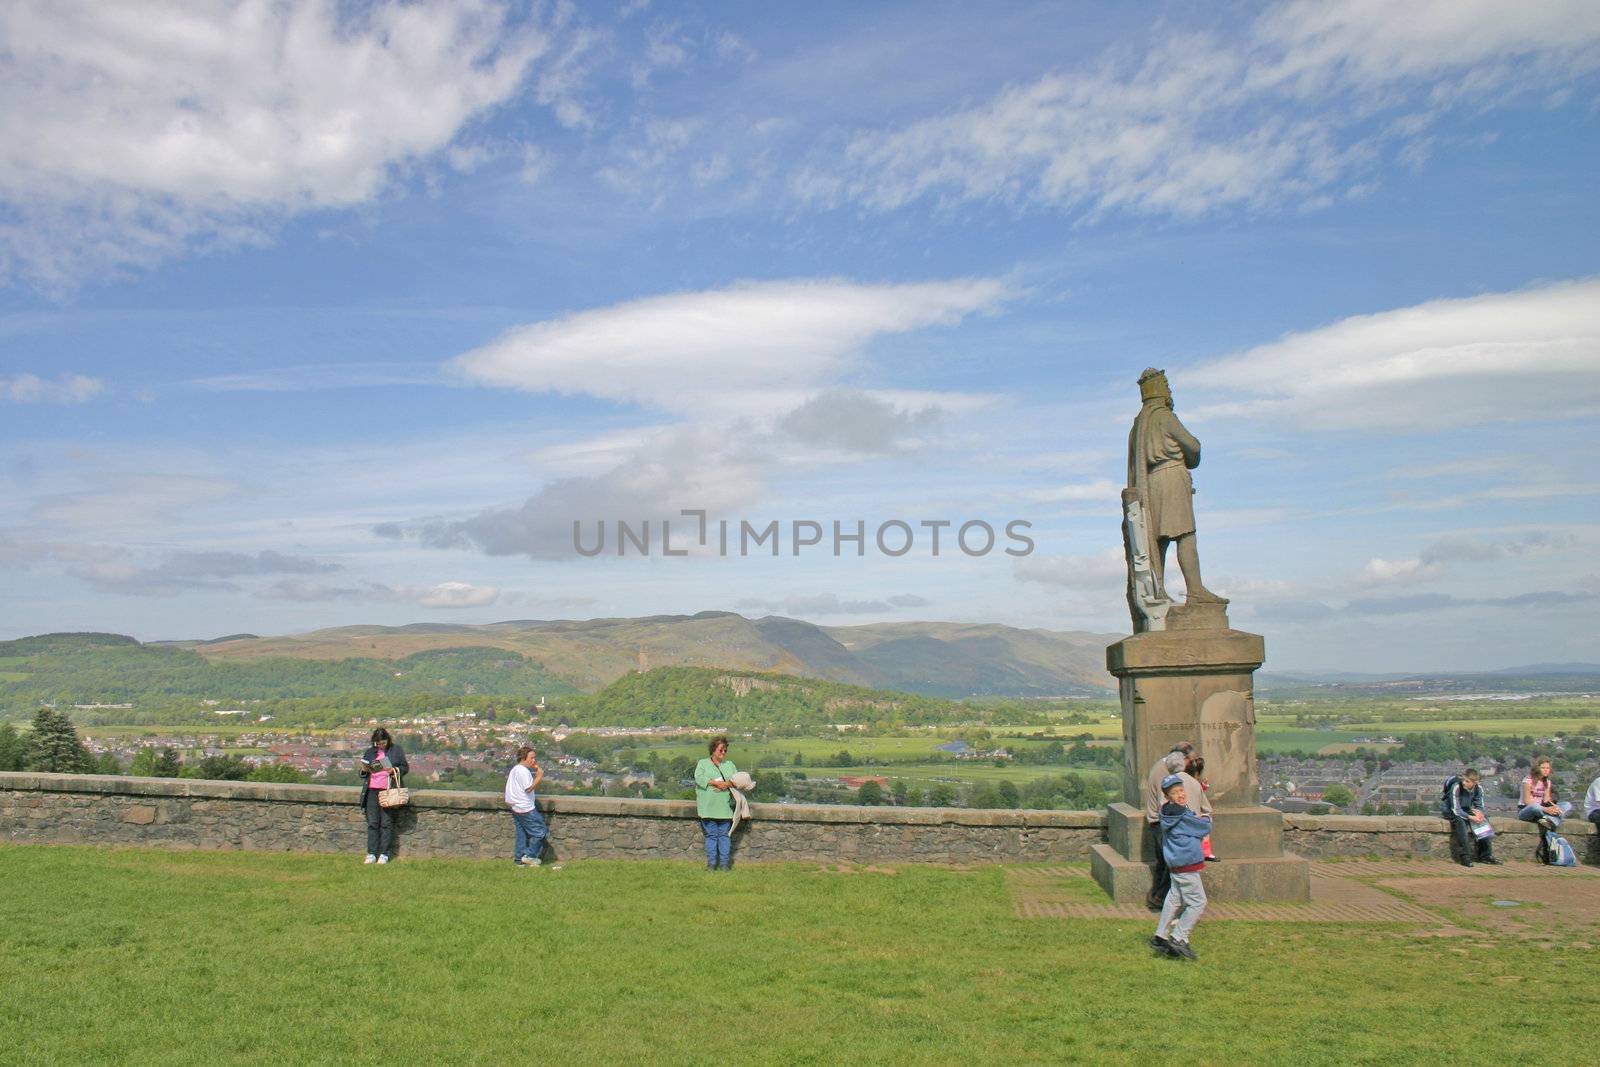 Tourists at Robert the Bruce Statue near Stirling Castle in Scot by green308